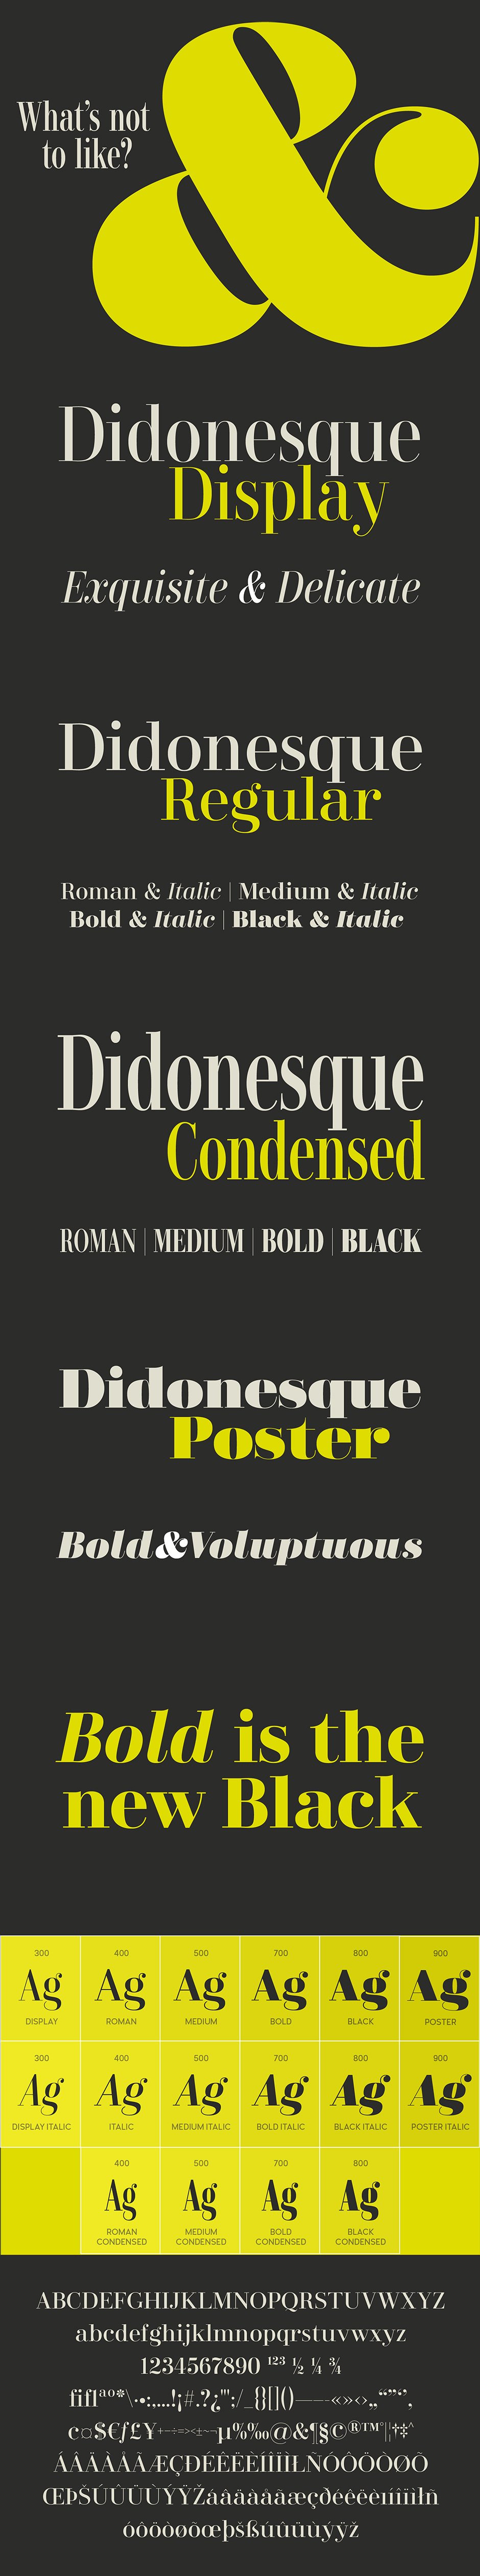 Didonesque Lite Font Family